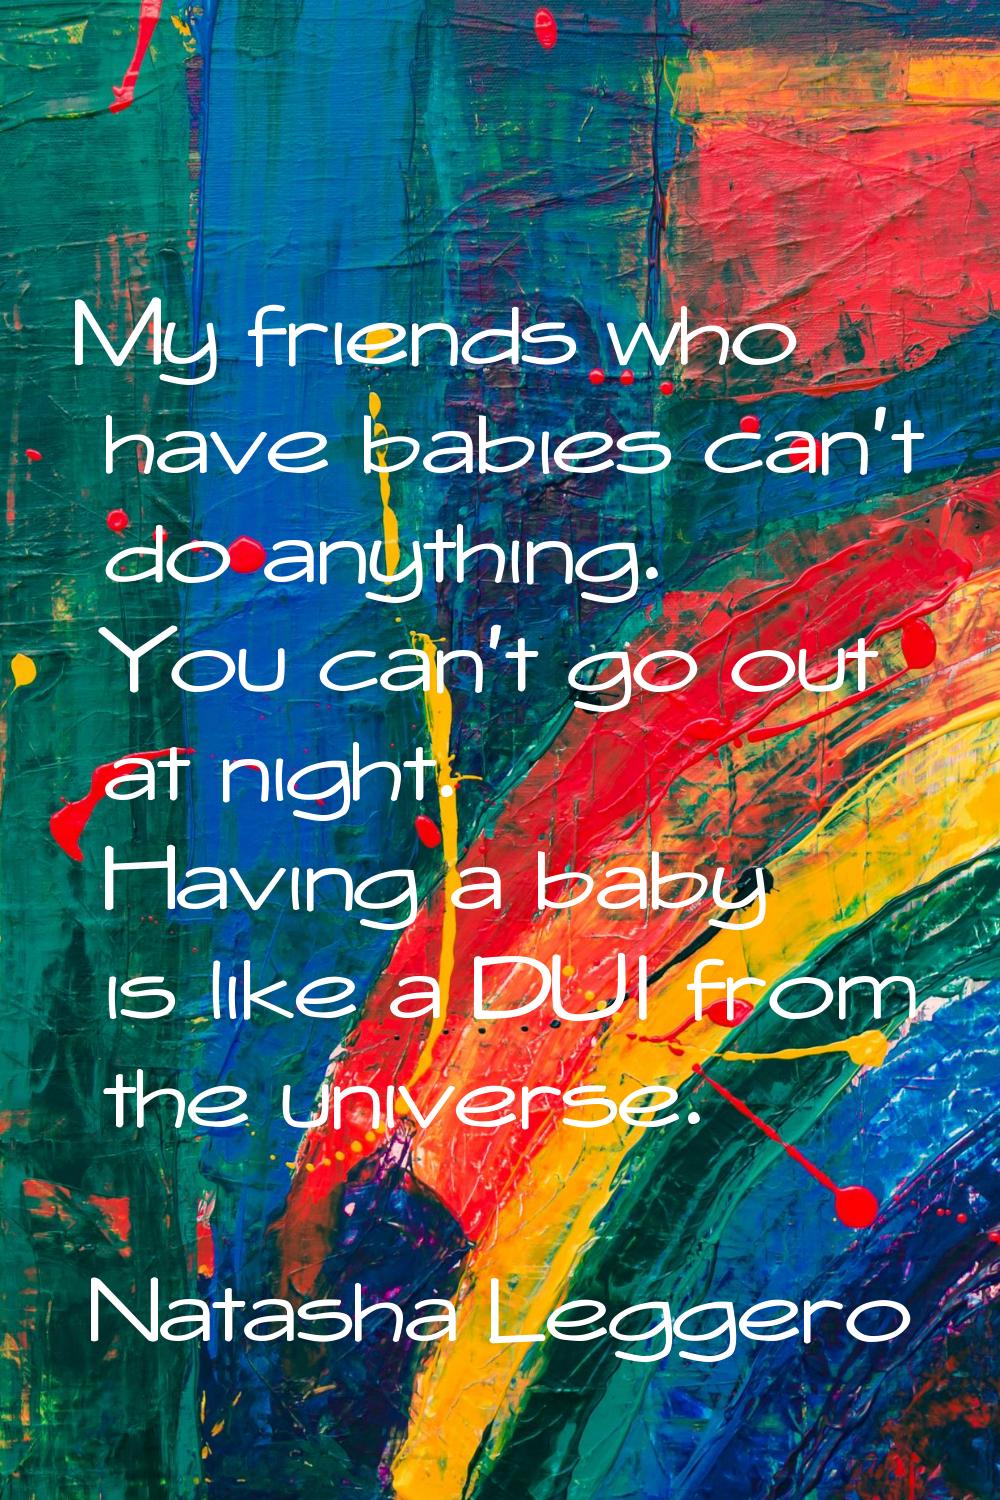 My friends who have babies can't do anything. You can't go out at night. Having a baby is like a DU